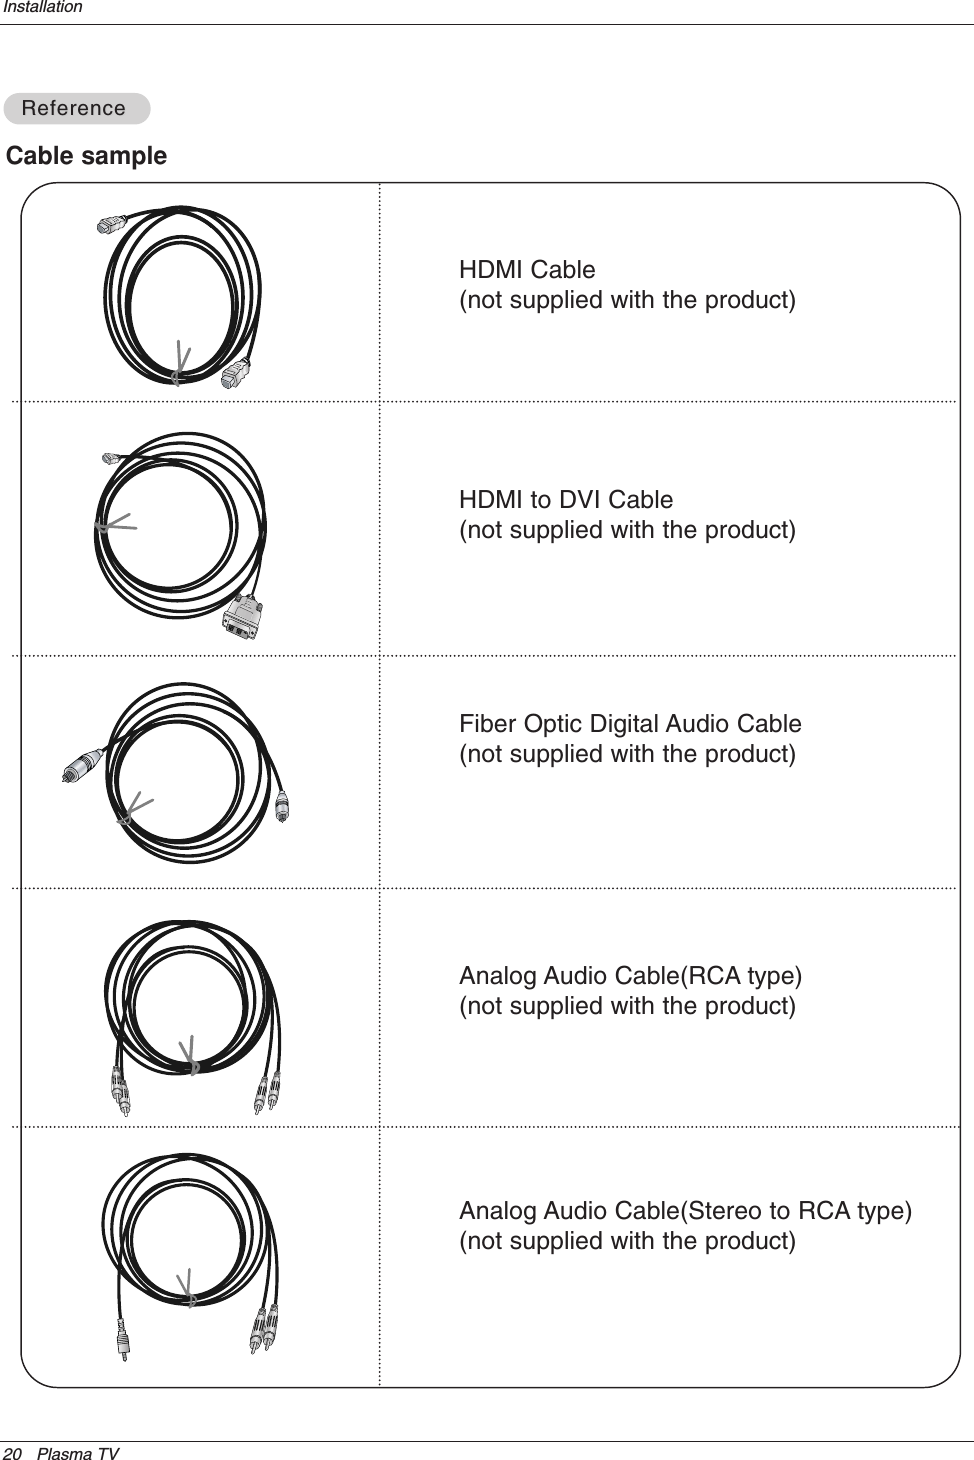 20 Plasma TVInstallationCable sampleHDMI Cable (not supplied with the product)HDMI to DVI Cable (not supplied with the product)Fiber Optic Digital Audio Cable(not supplied with the product)Analog Audio Cable(RCA type)(not supplied with the product)Analog Audio Cable(Stereo to RCA type)(not supplied with the product)ReferenceReference